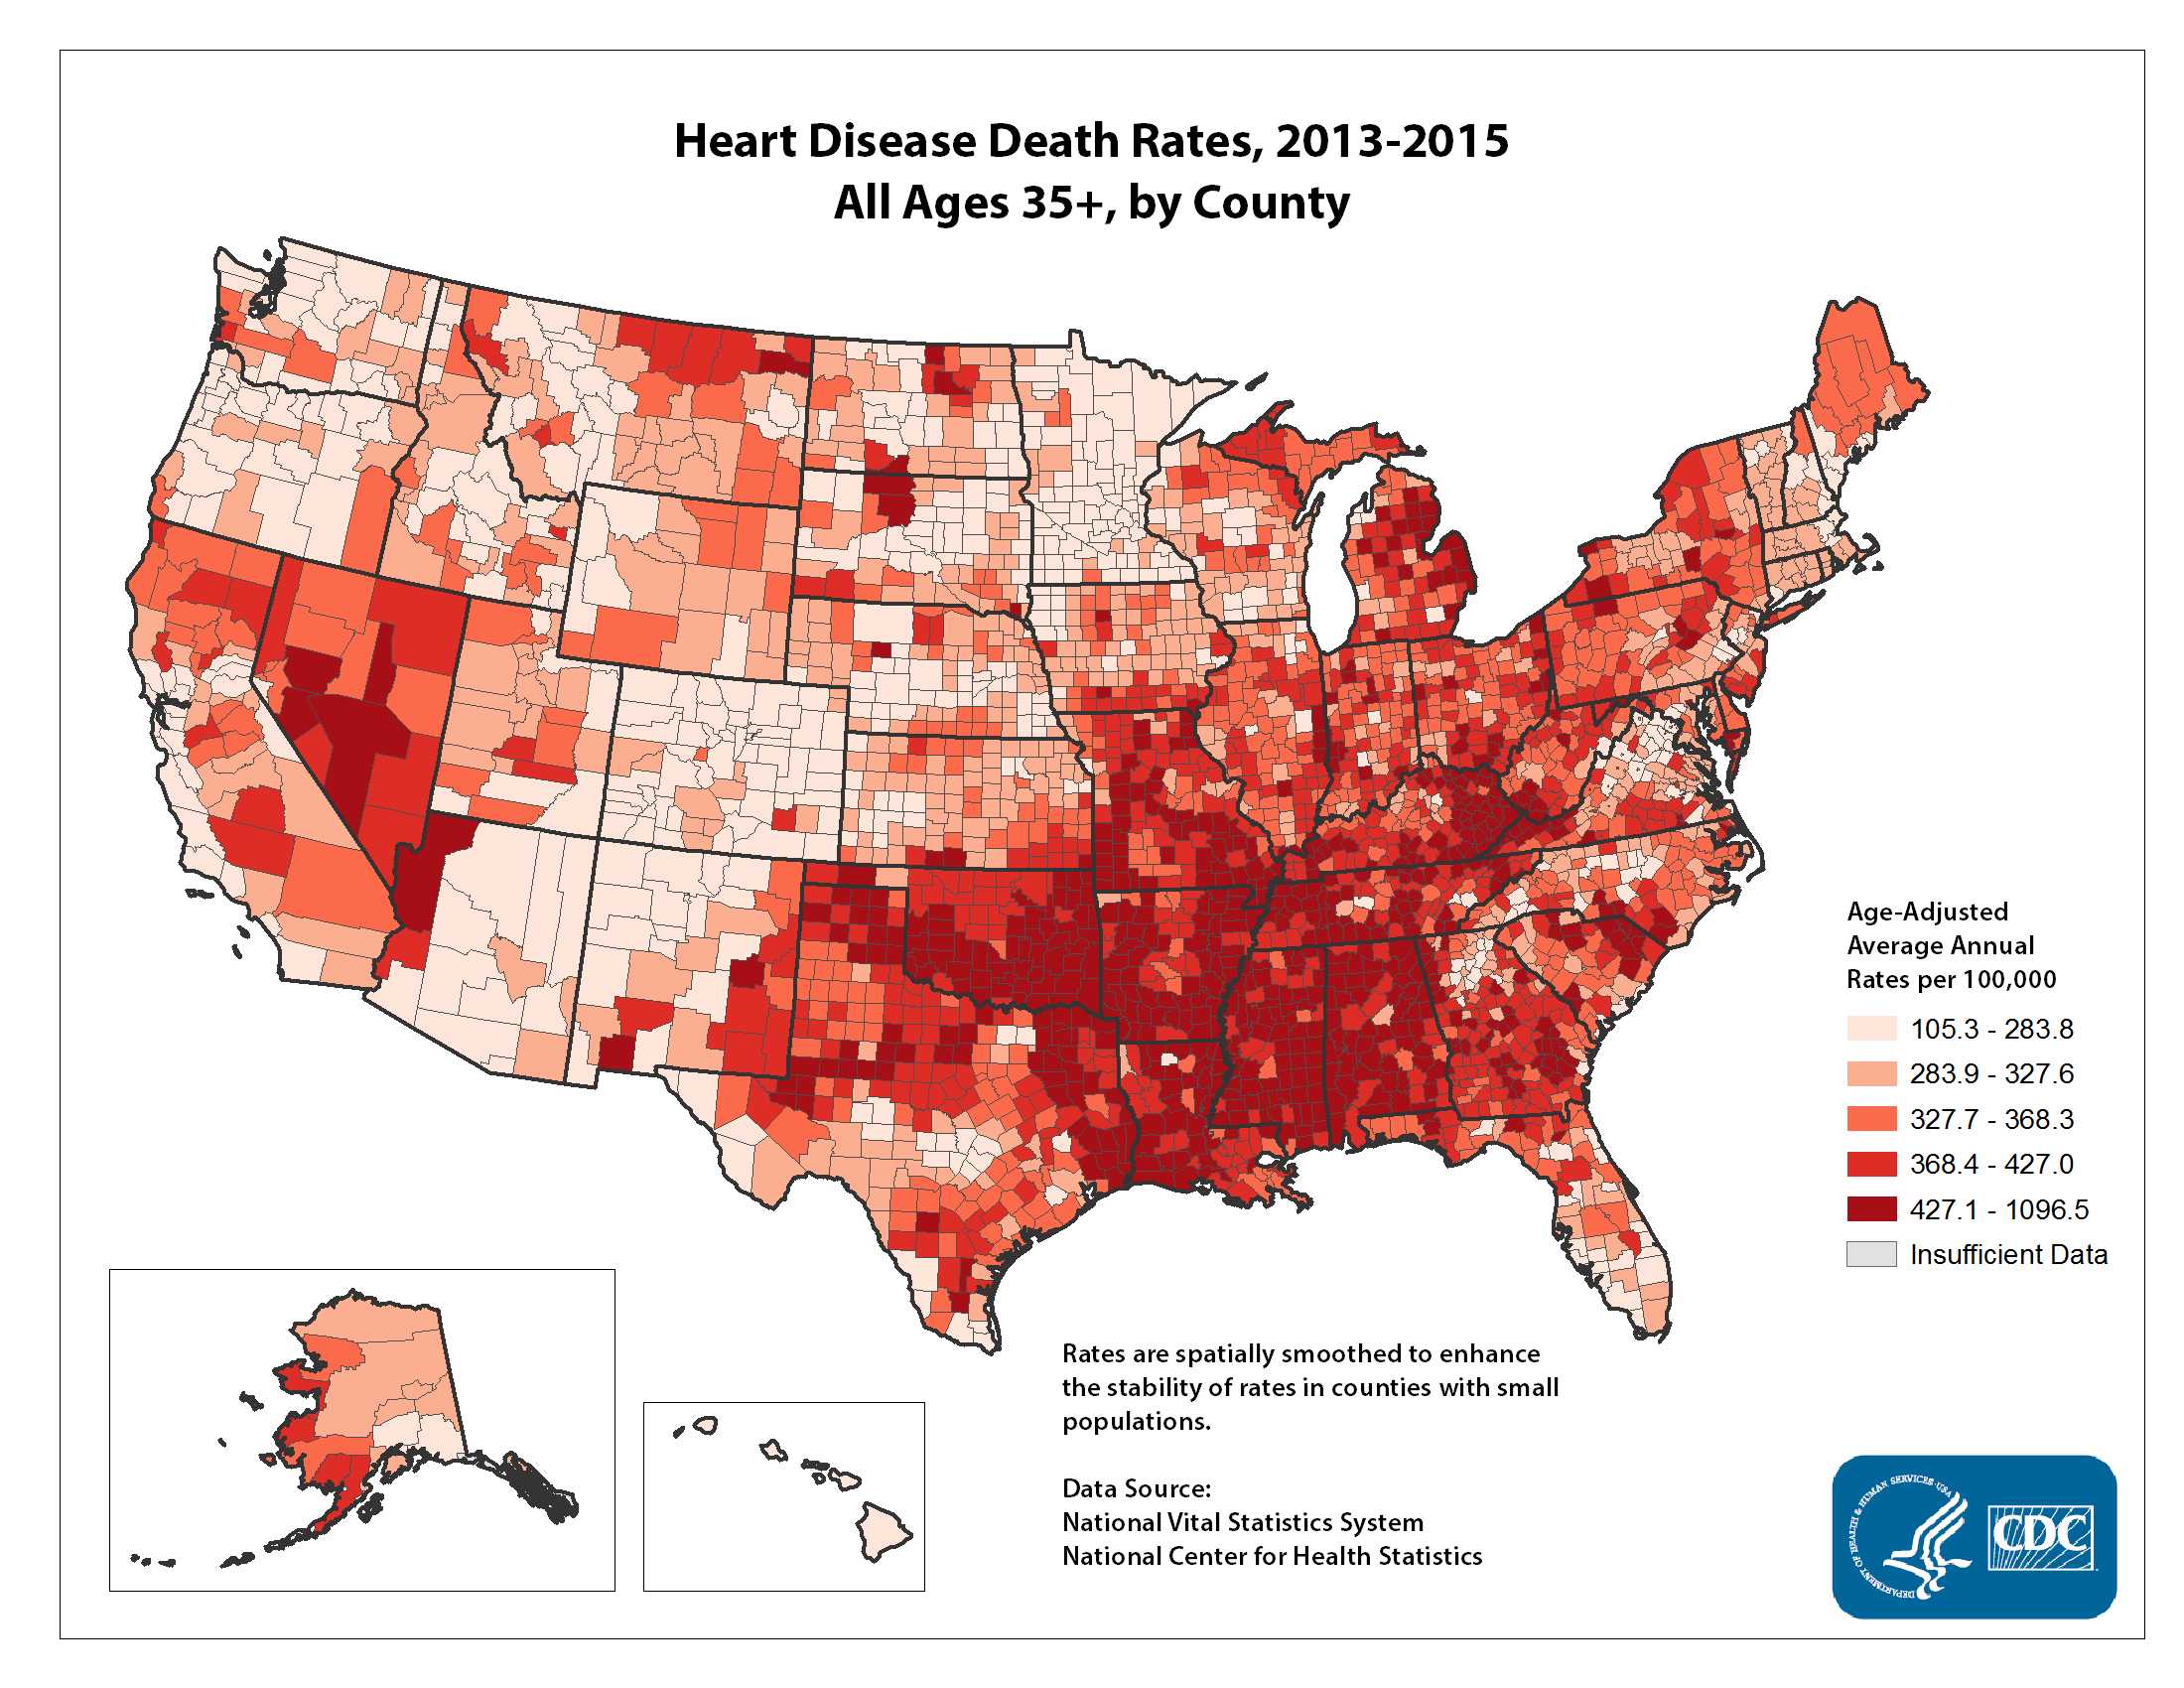 Heart Disease Death Rates for 2012 through 2014 for Adults Aged 35 Years and Older by County. The map shows that concentrations of counties with the highest heart disease death rates - meaning the top quintile - are located primarily in Alabama, Mississippi, Louisiana, Arkansas, and Oklahoma.  Pockets of high-rate counties also were found in Georgia, Kentucky, Tennessee, Missouri, Texas, and Nevada.